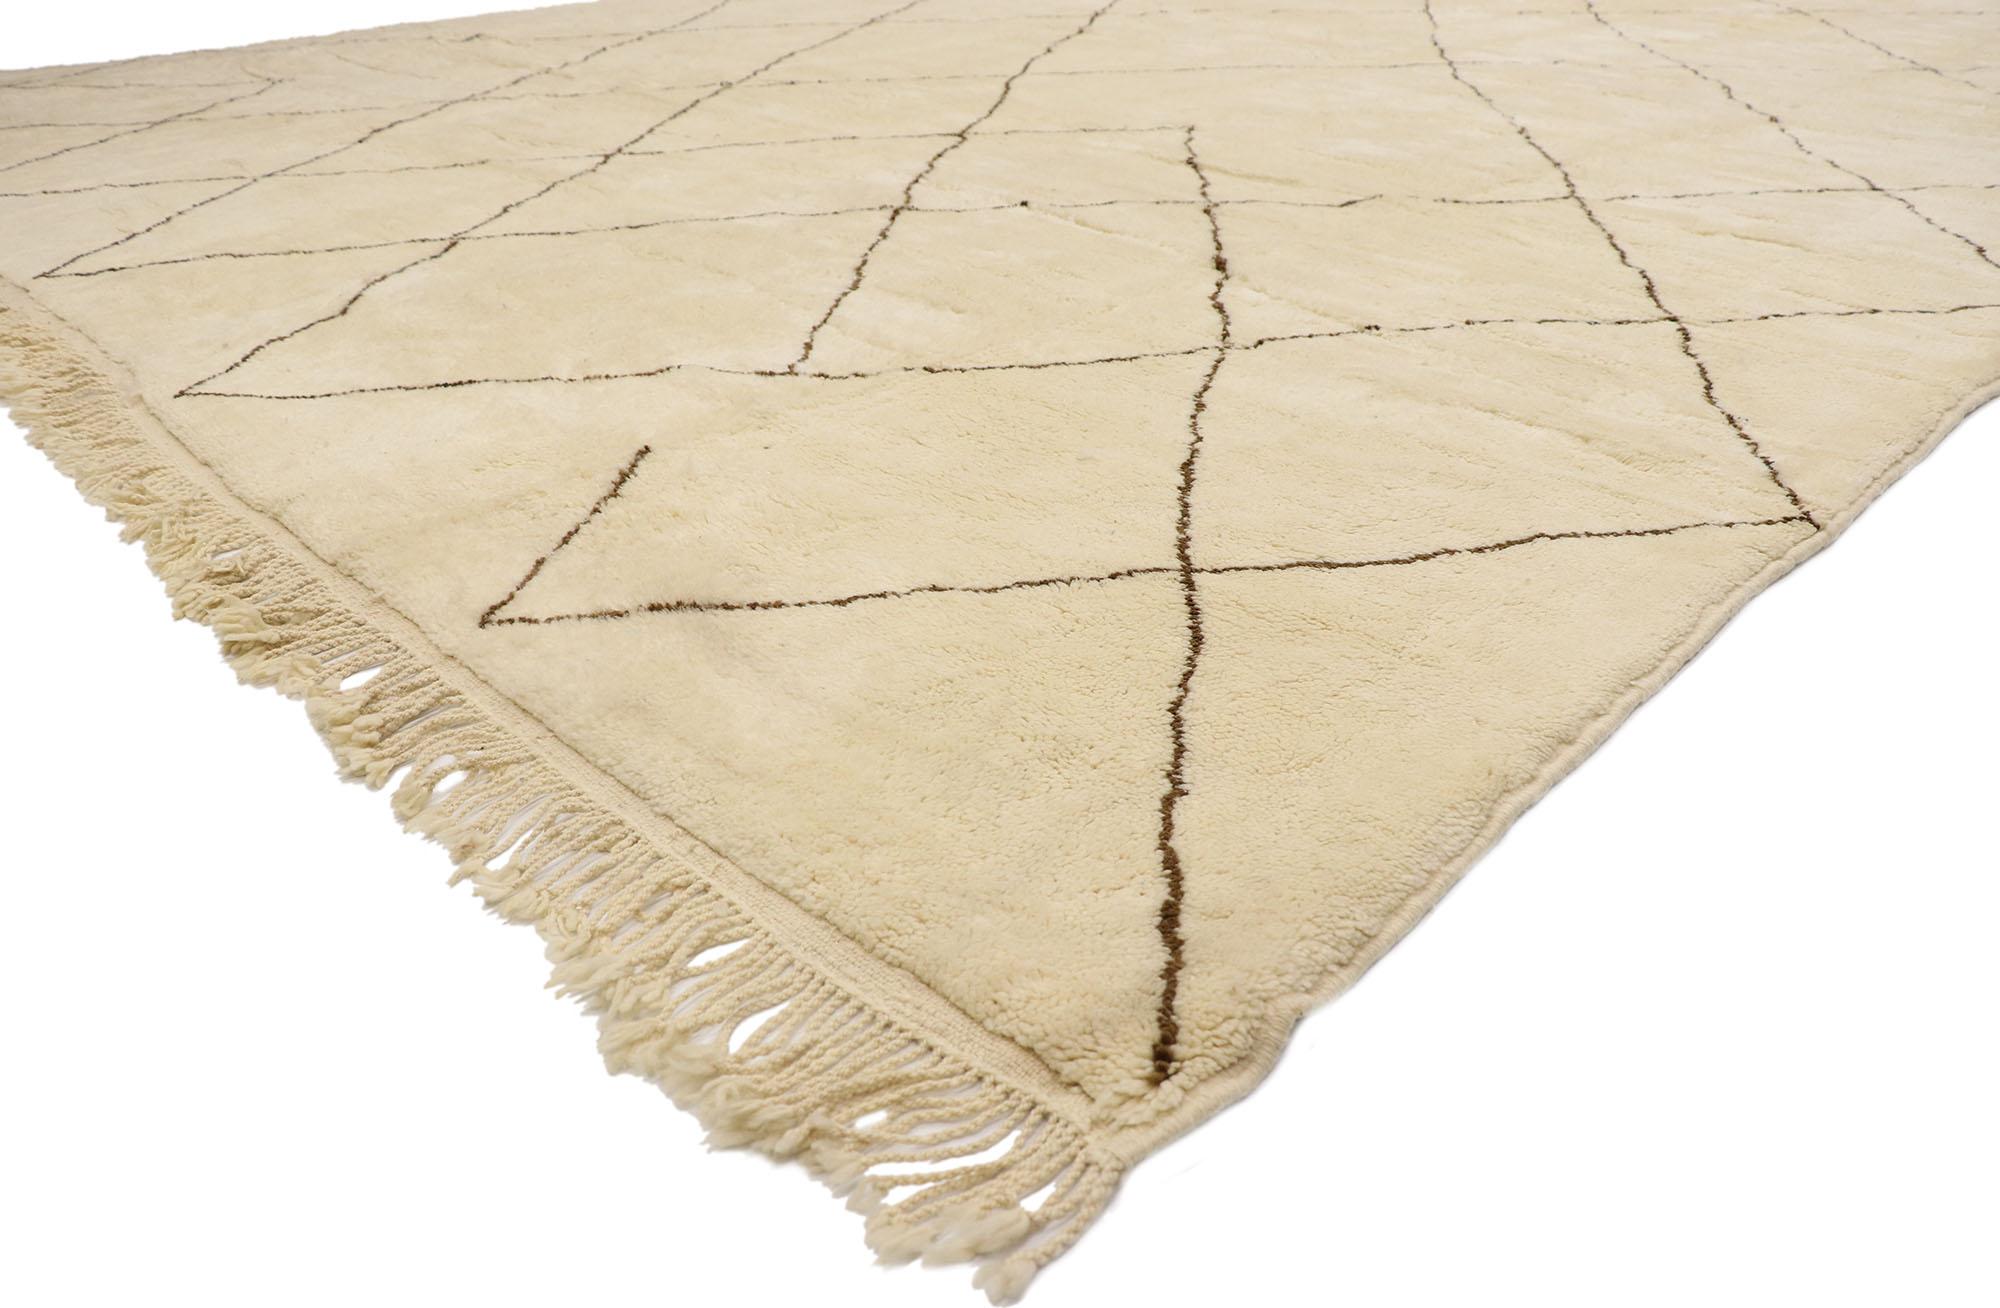 21169 new contemporary Berber Moroccan rug with Mid-Century Modern style. With its simplicity, plush pile and Mid-Century Modern vibes, this hand knotted wool contemporary Berber Moroccan rug provides a feeling of cozy contentment without the